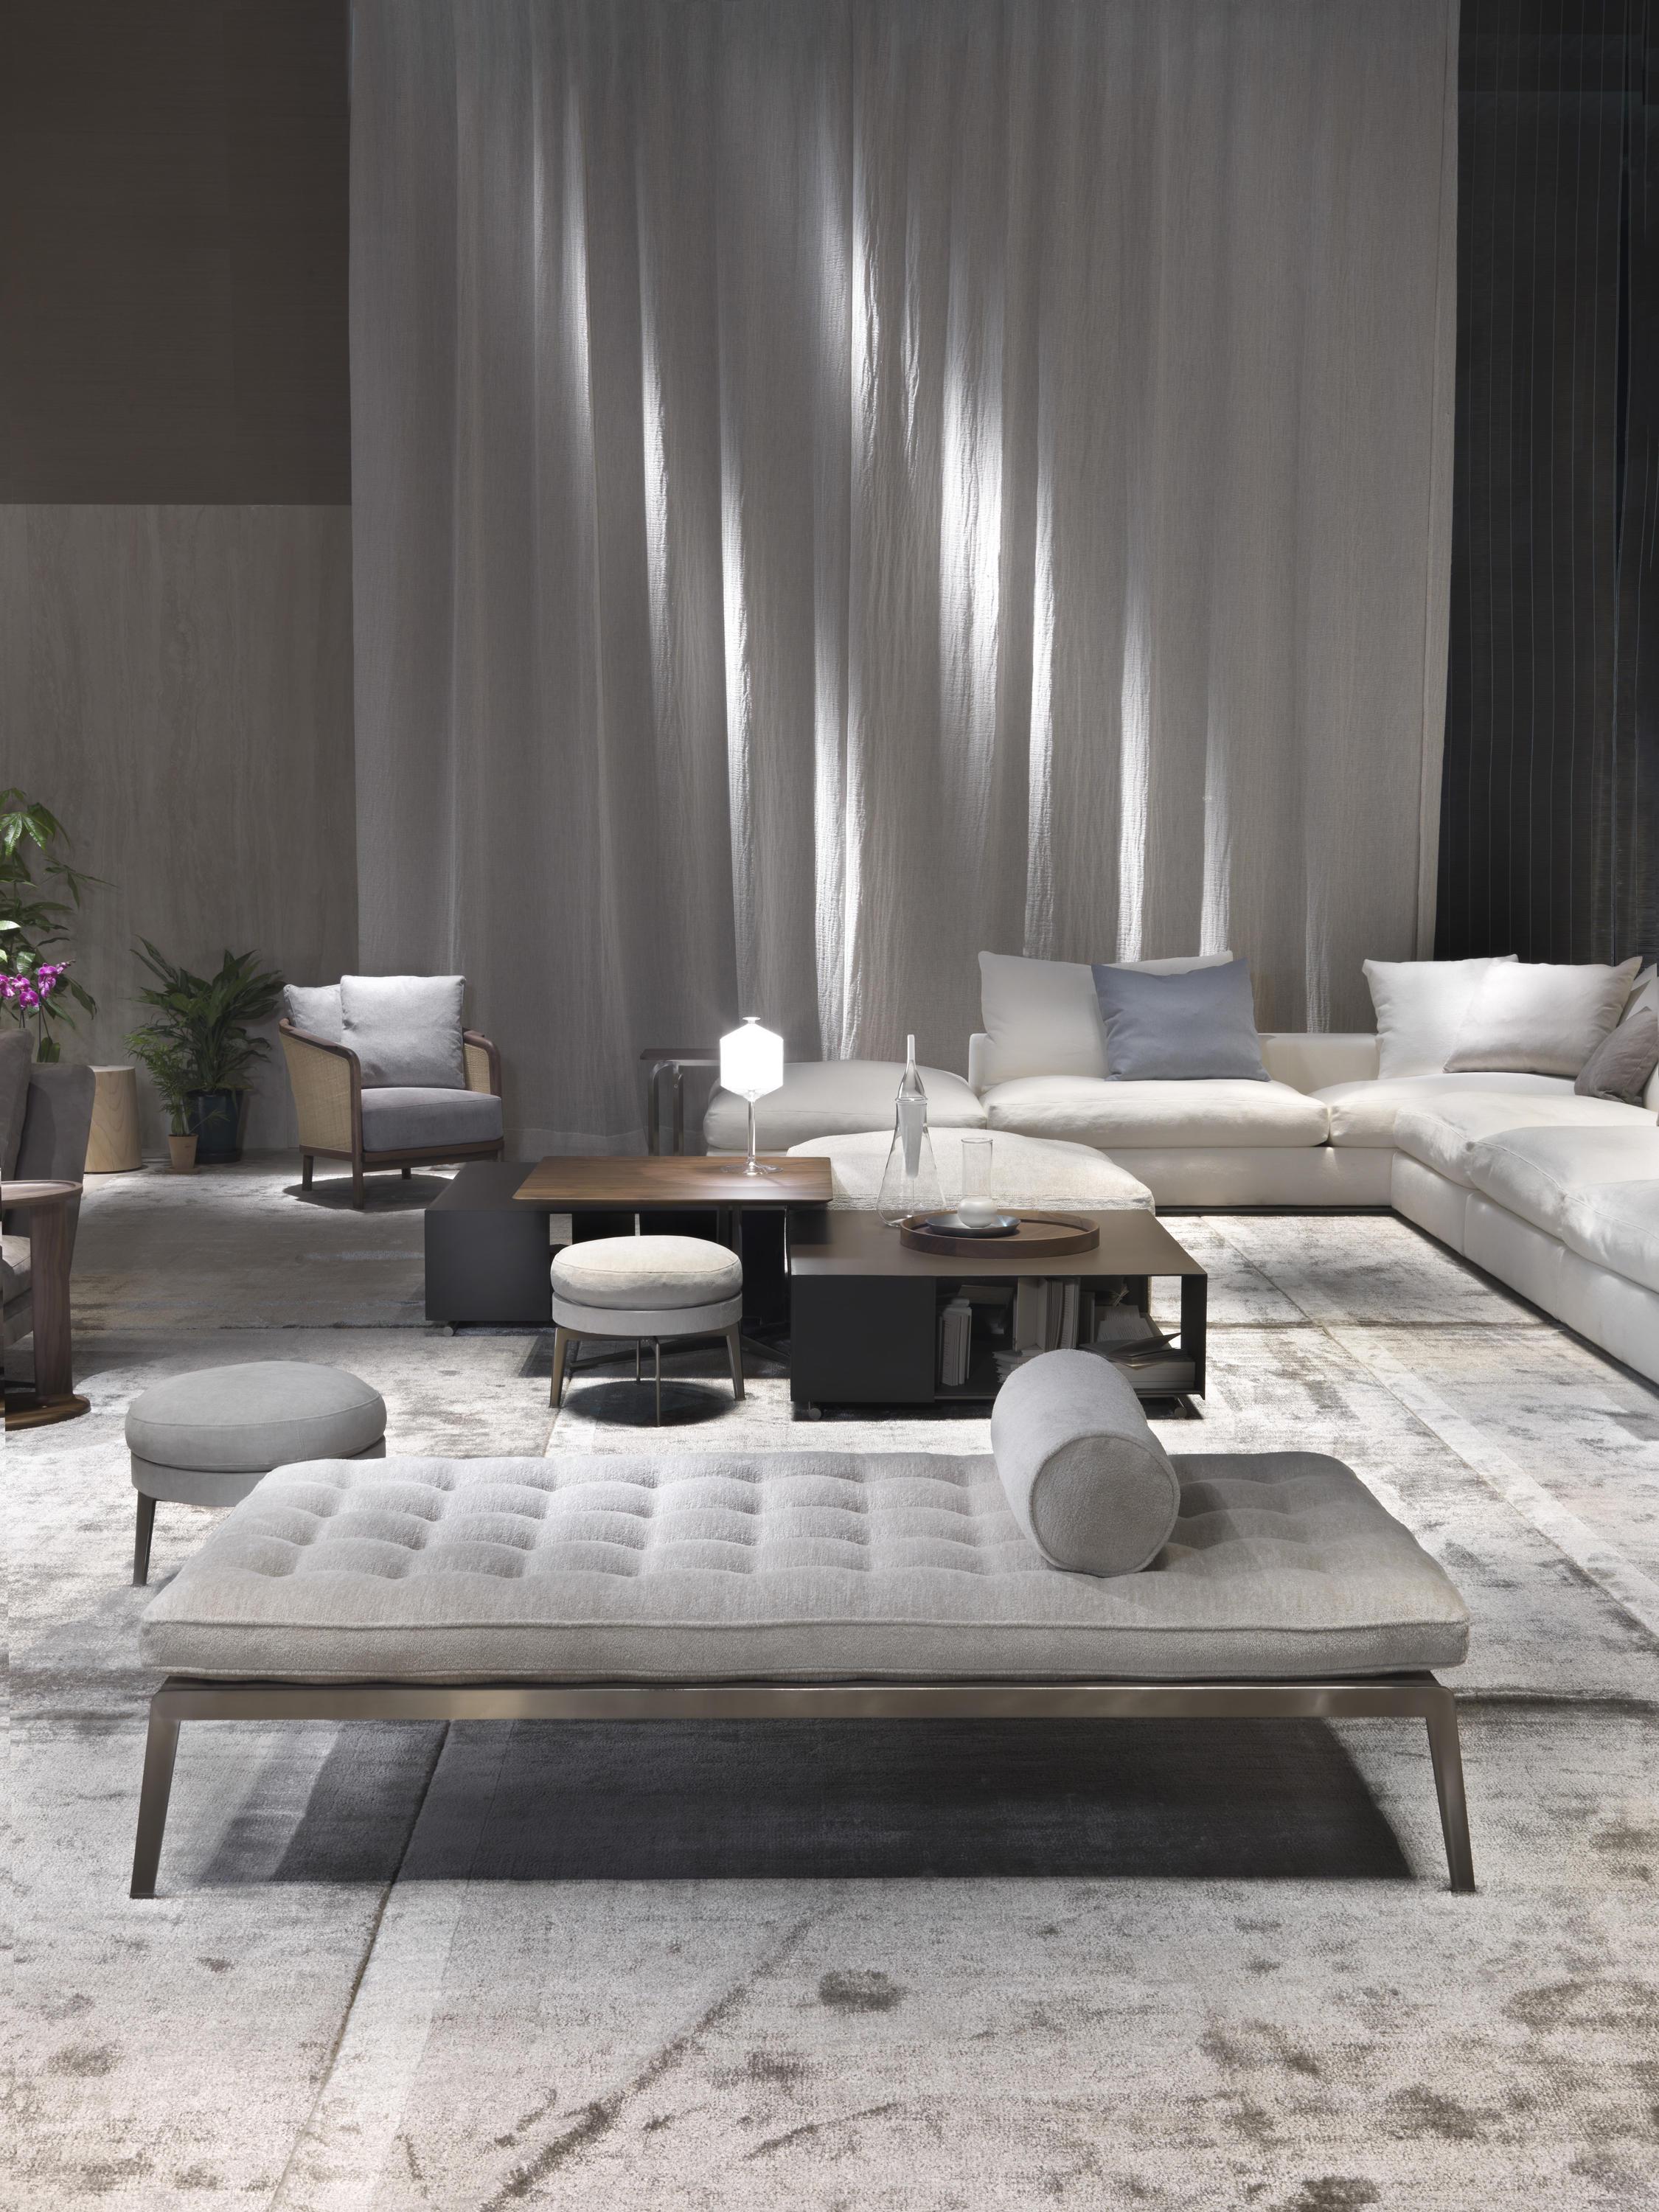 Magi Fabric Daybed, by Antonio Citterio from Flexform